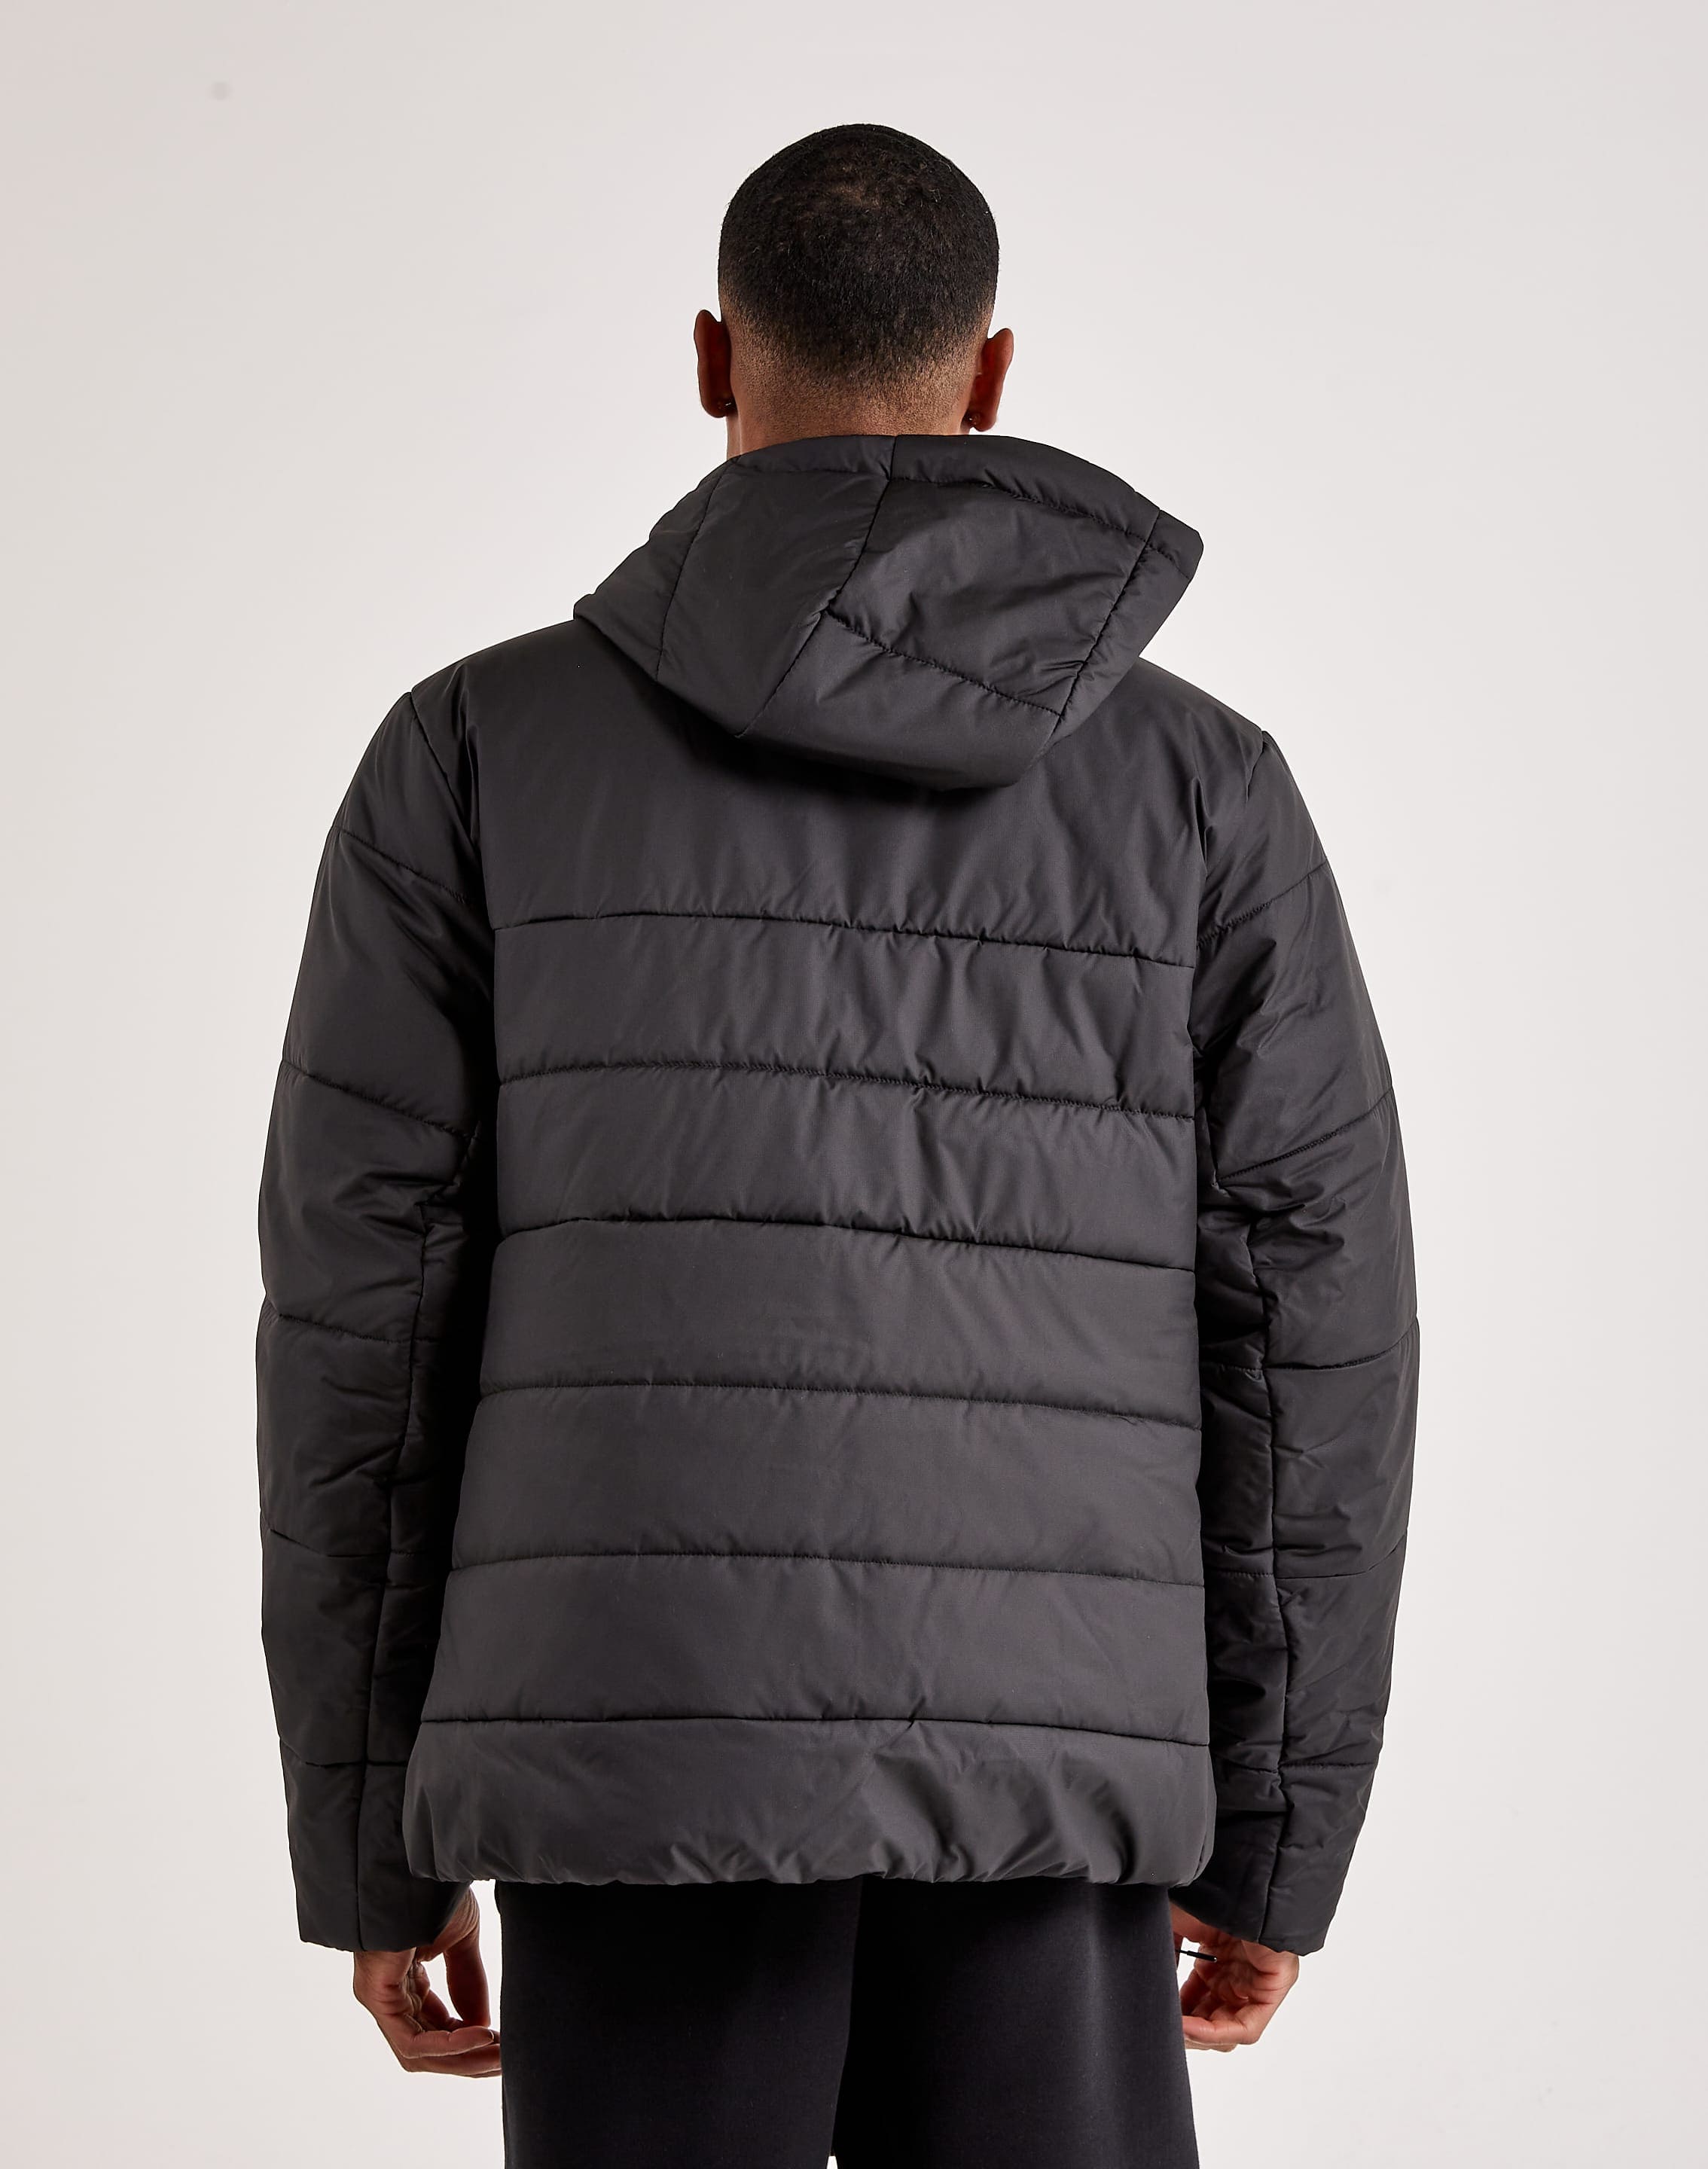 Nike Down Filled Jacket With Hood In Black 866027-010 for Men